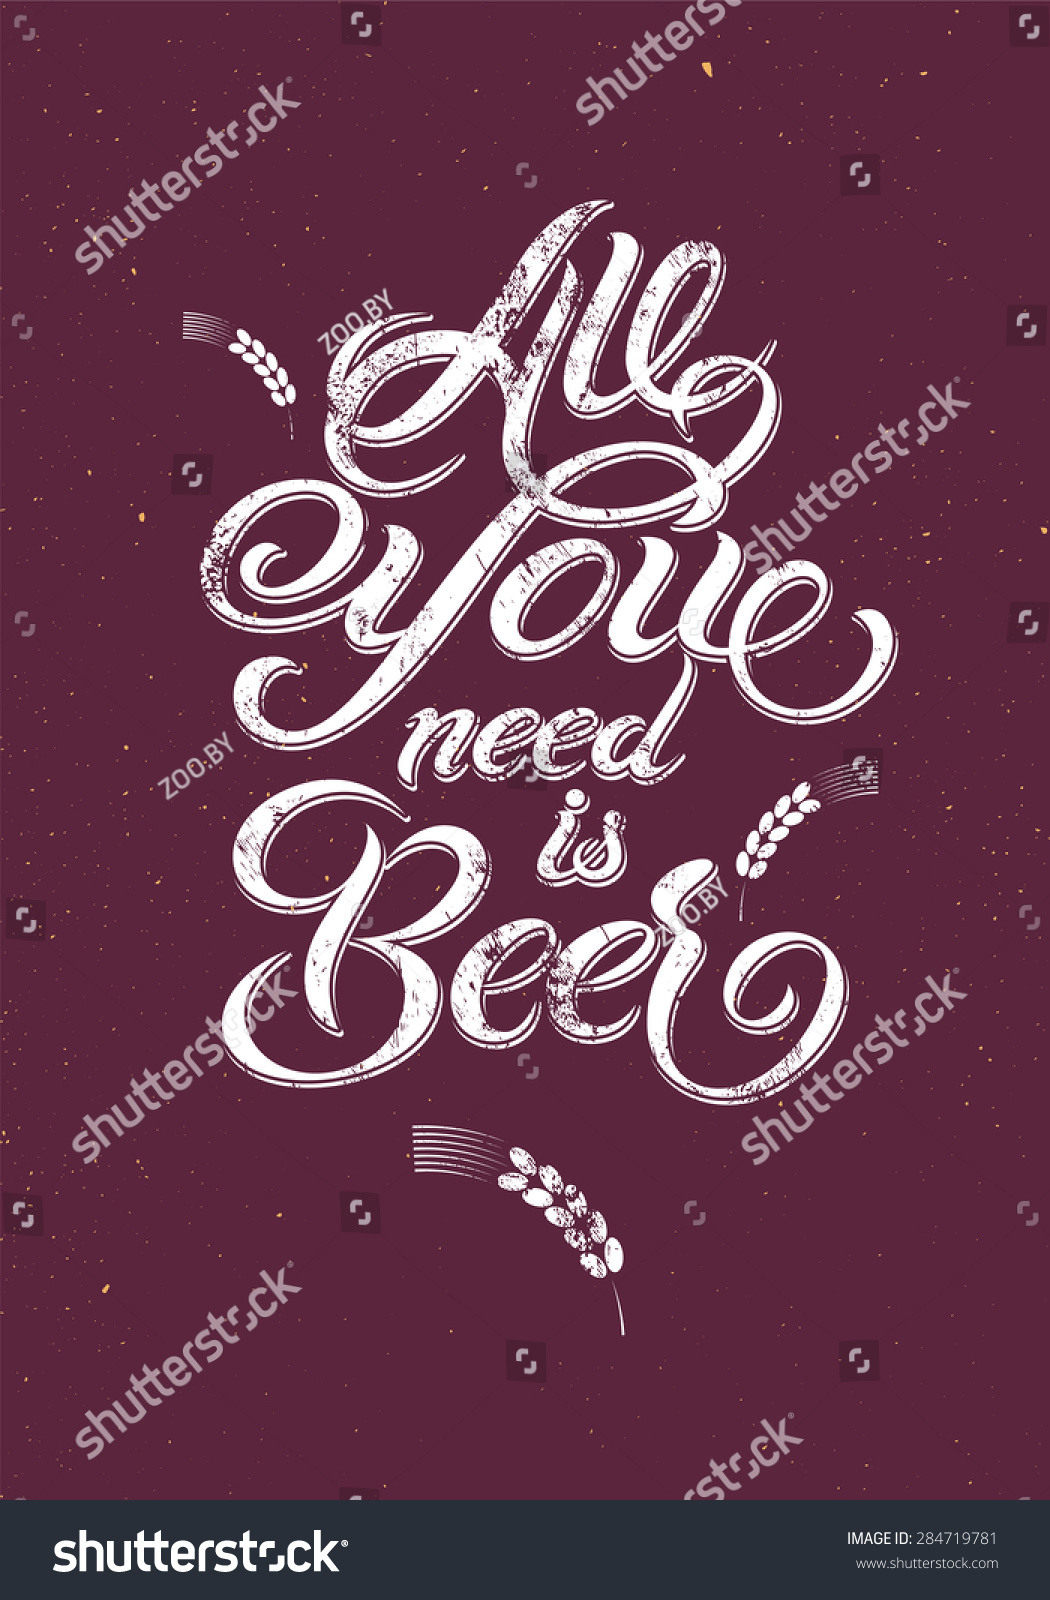 All You Need Beer Vintage Calligraphic Stock Vector Royalty Free 284719781 Shutterstock